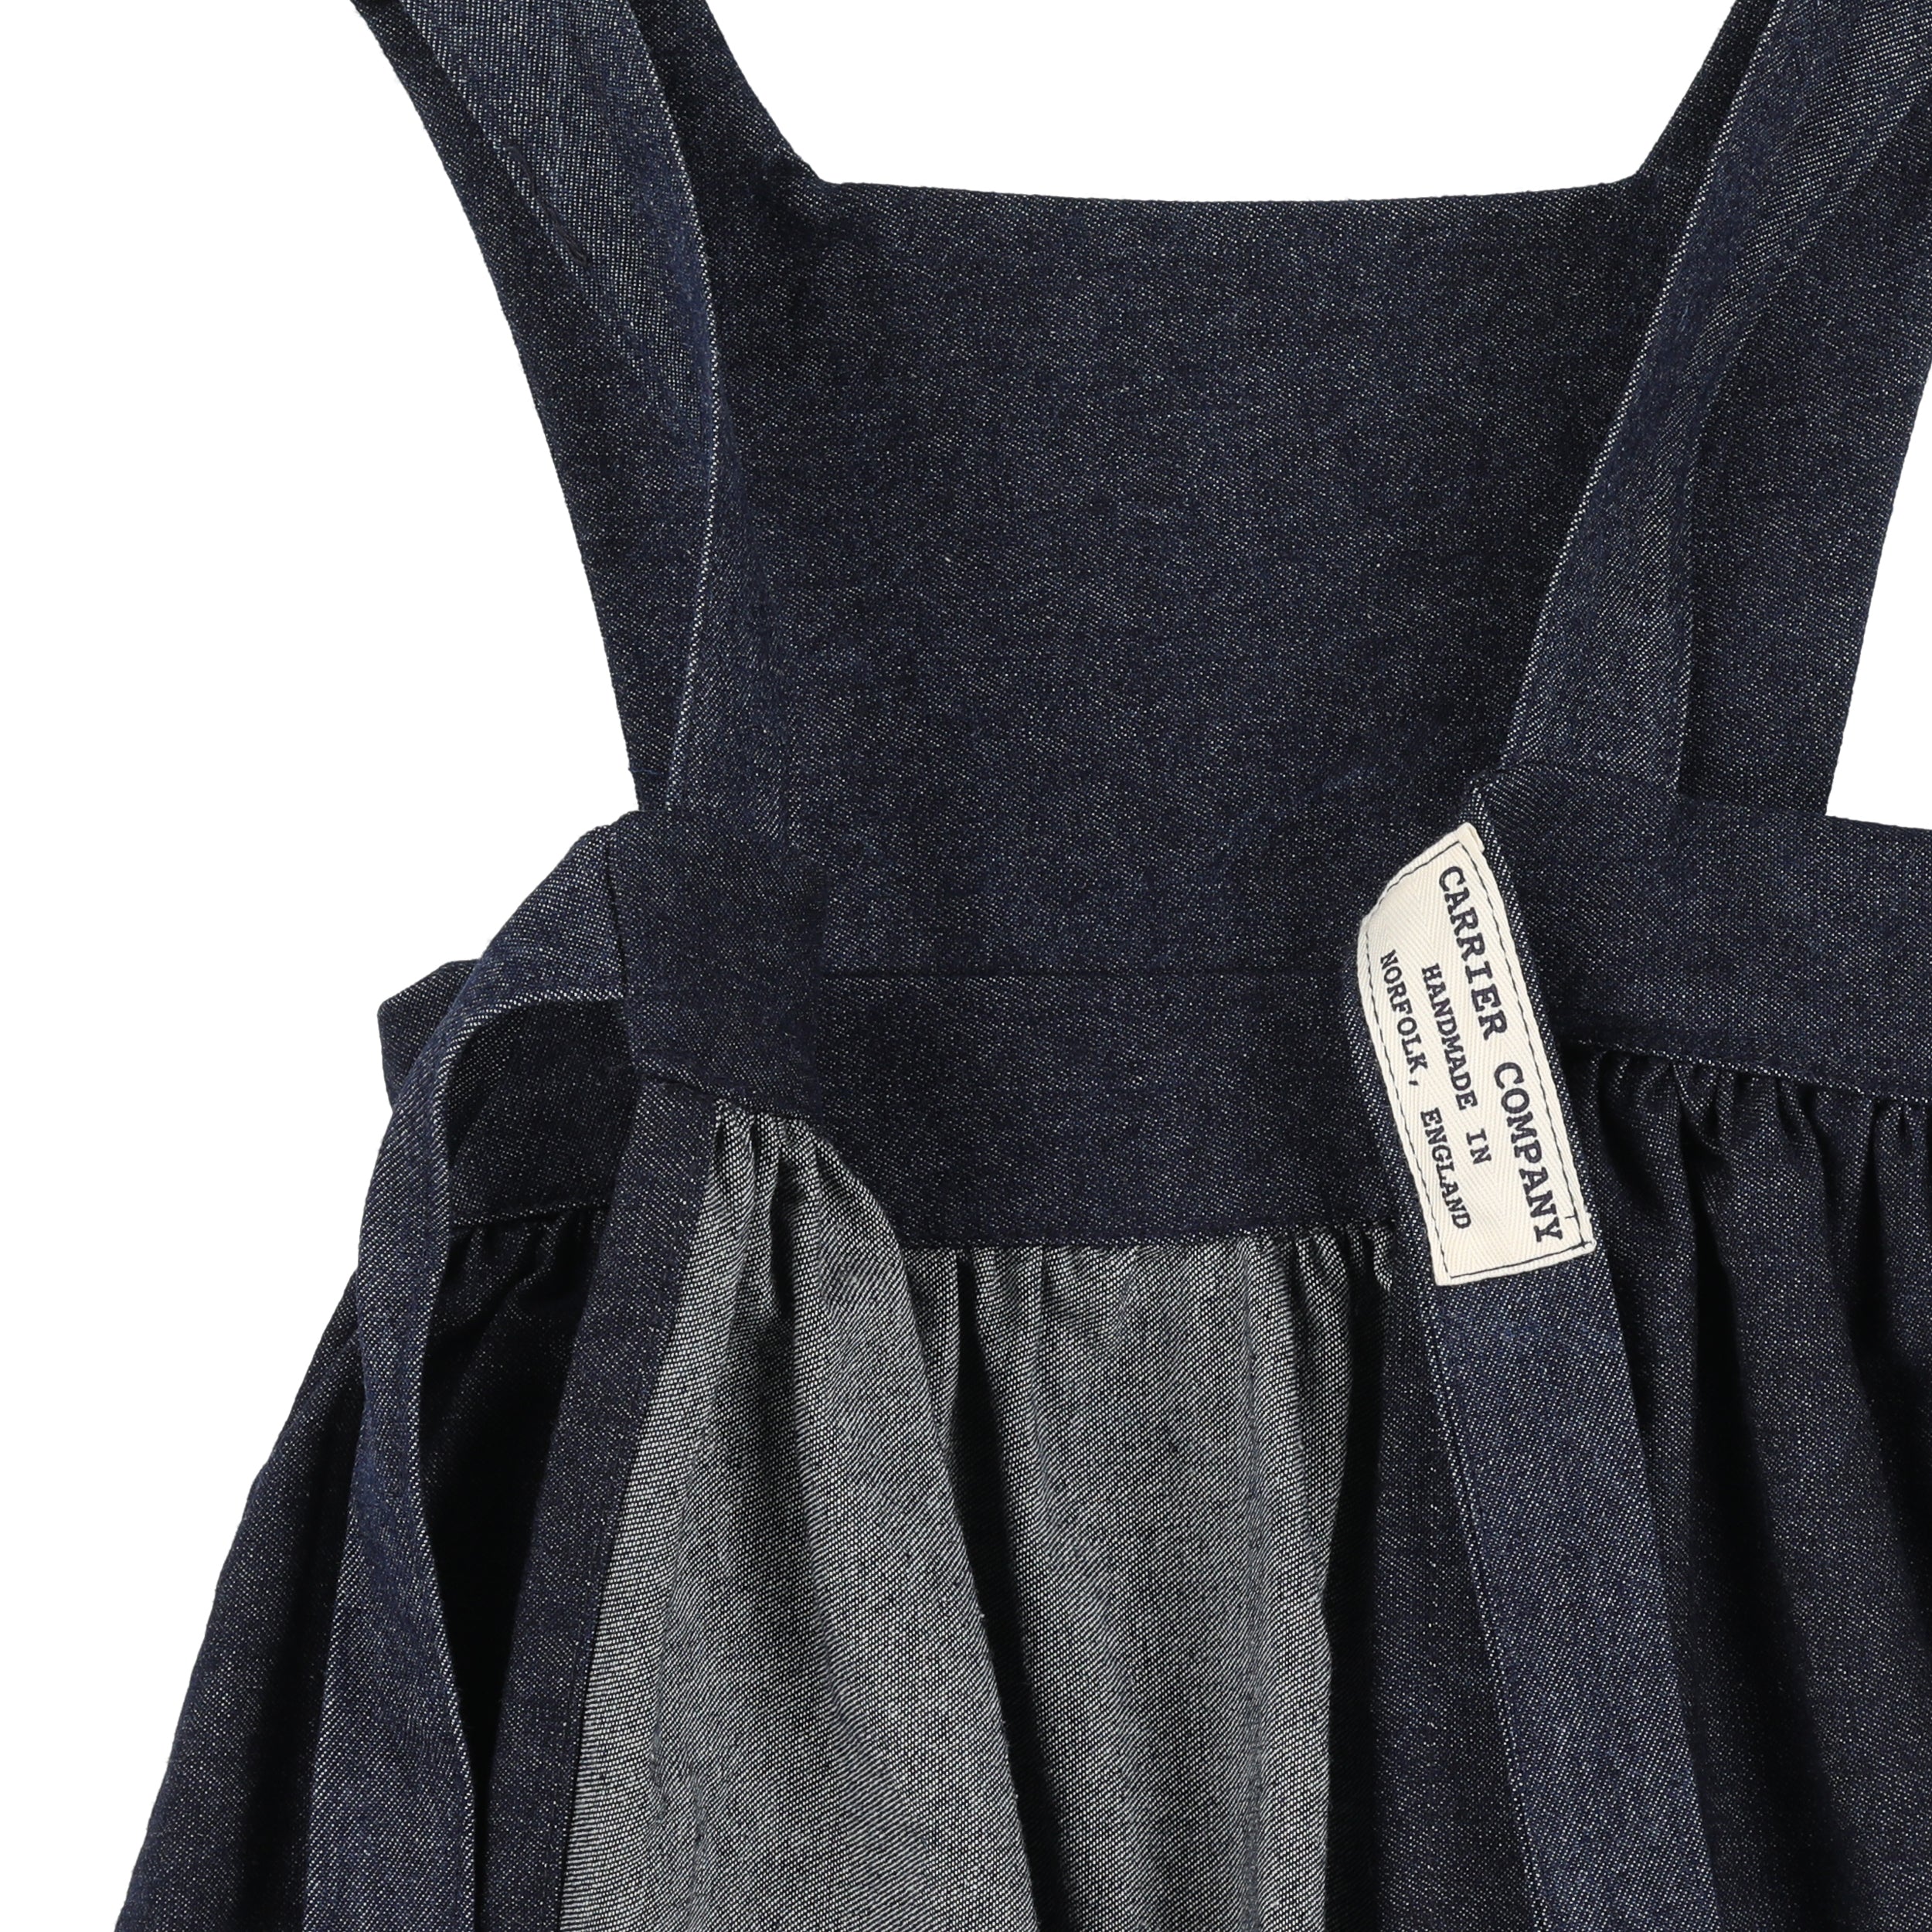 Carrier Company Child's Pinafore in Denim